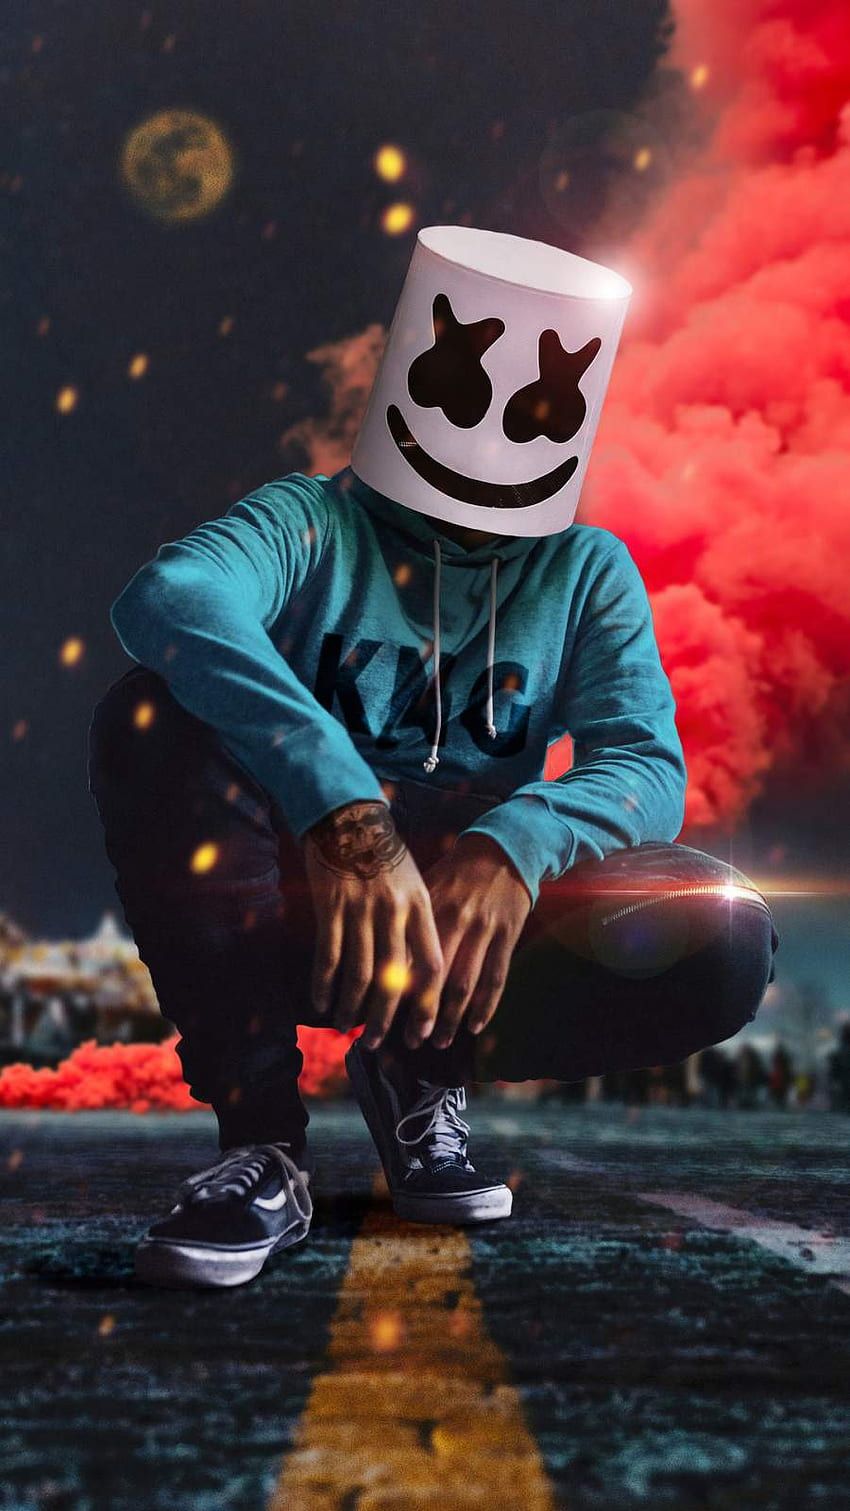 Marshmello iPhone Wallpaper with high-resolution 1080x1920 pixel. You can use this wallpaper for your iPhone 5, 6, 7, 8, X, XS, XR backgrounds, Mobile Screensaver, or iPad Lock Screen - Marshmello